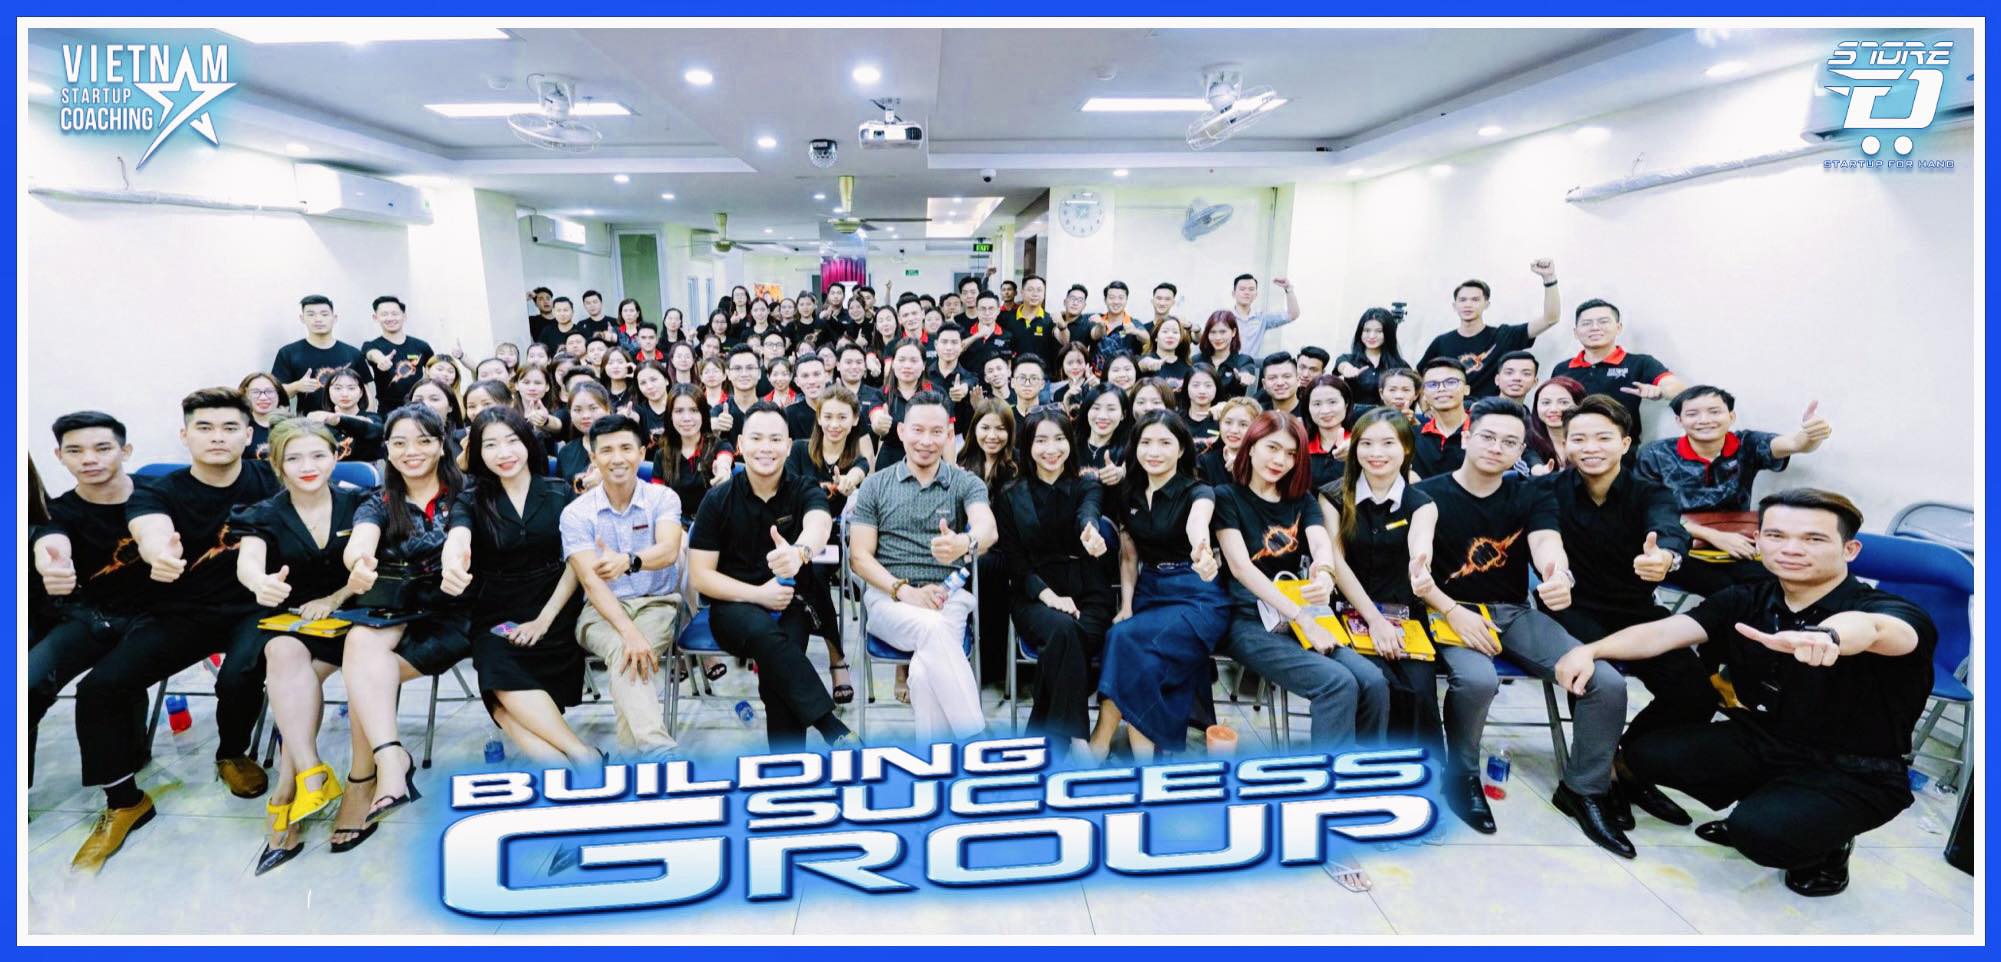 BUILDING SUCCESS GROUP – CÔNG TY DSTORE CN HCM